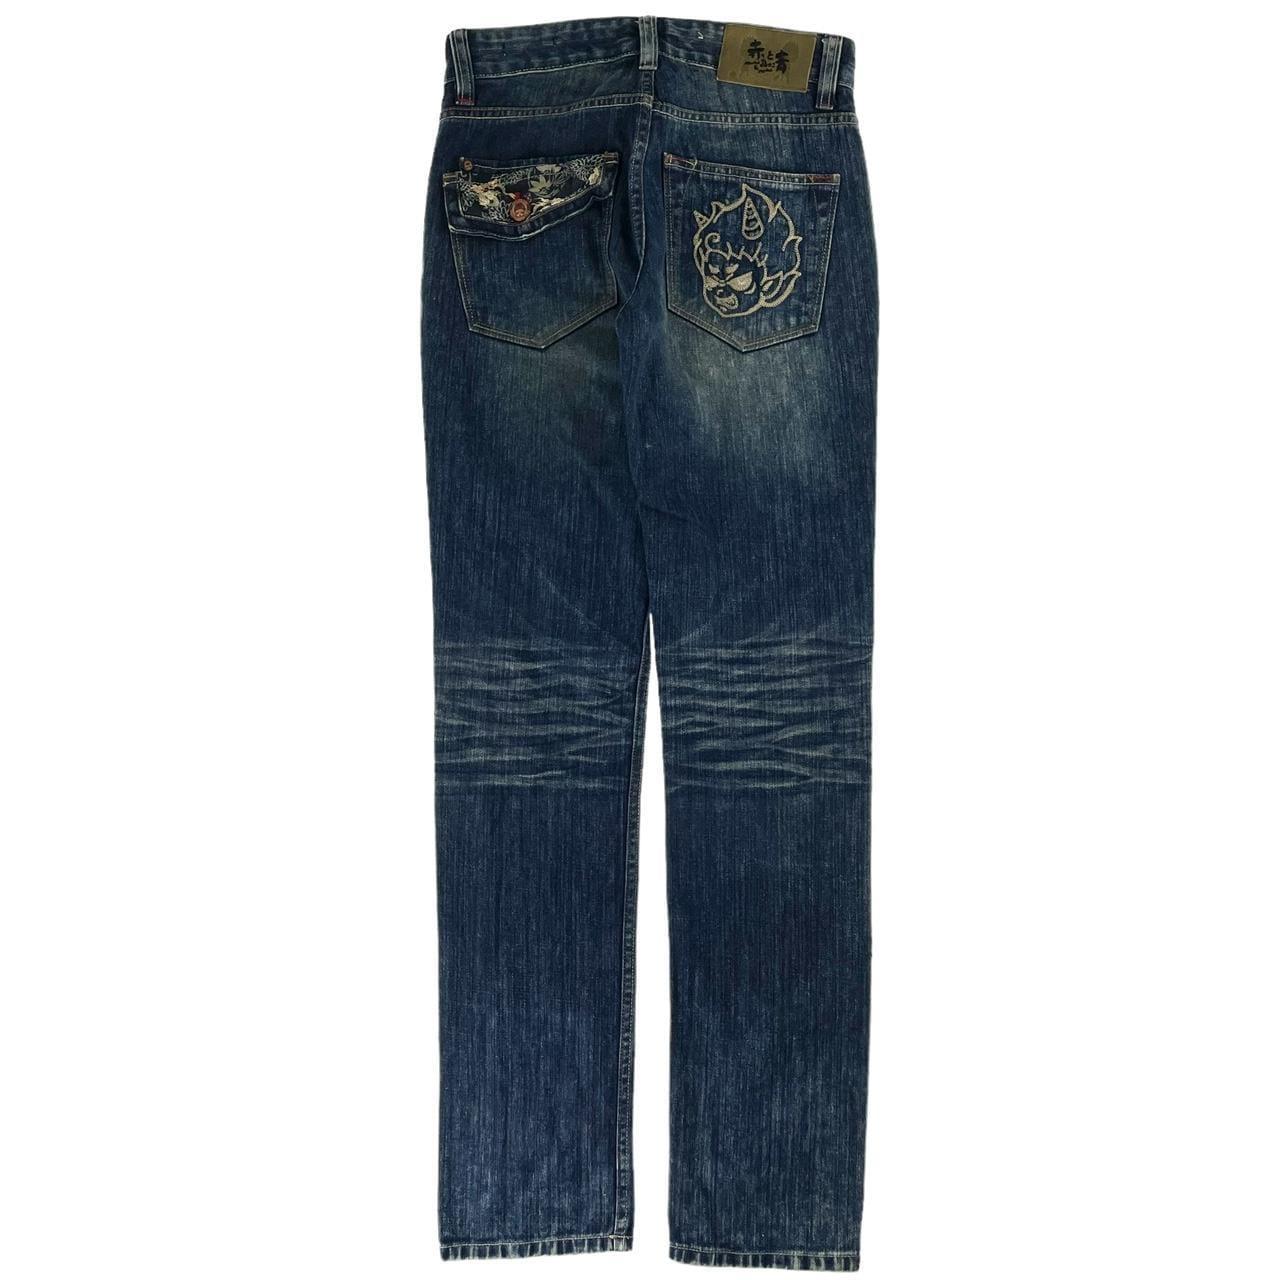 Vintage Big train monster Japanese denim jeans trousers W30 - Known Source